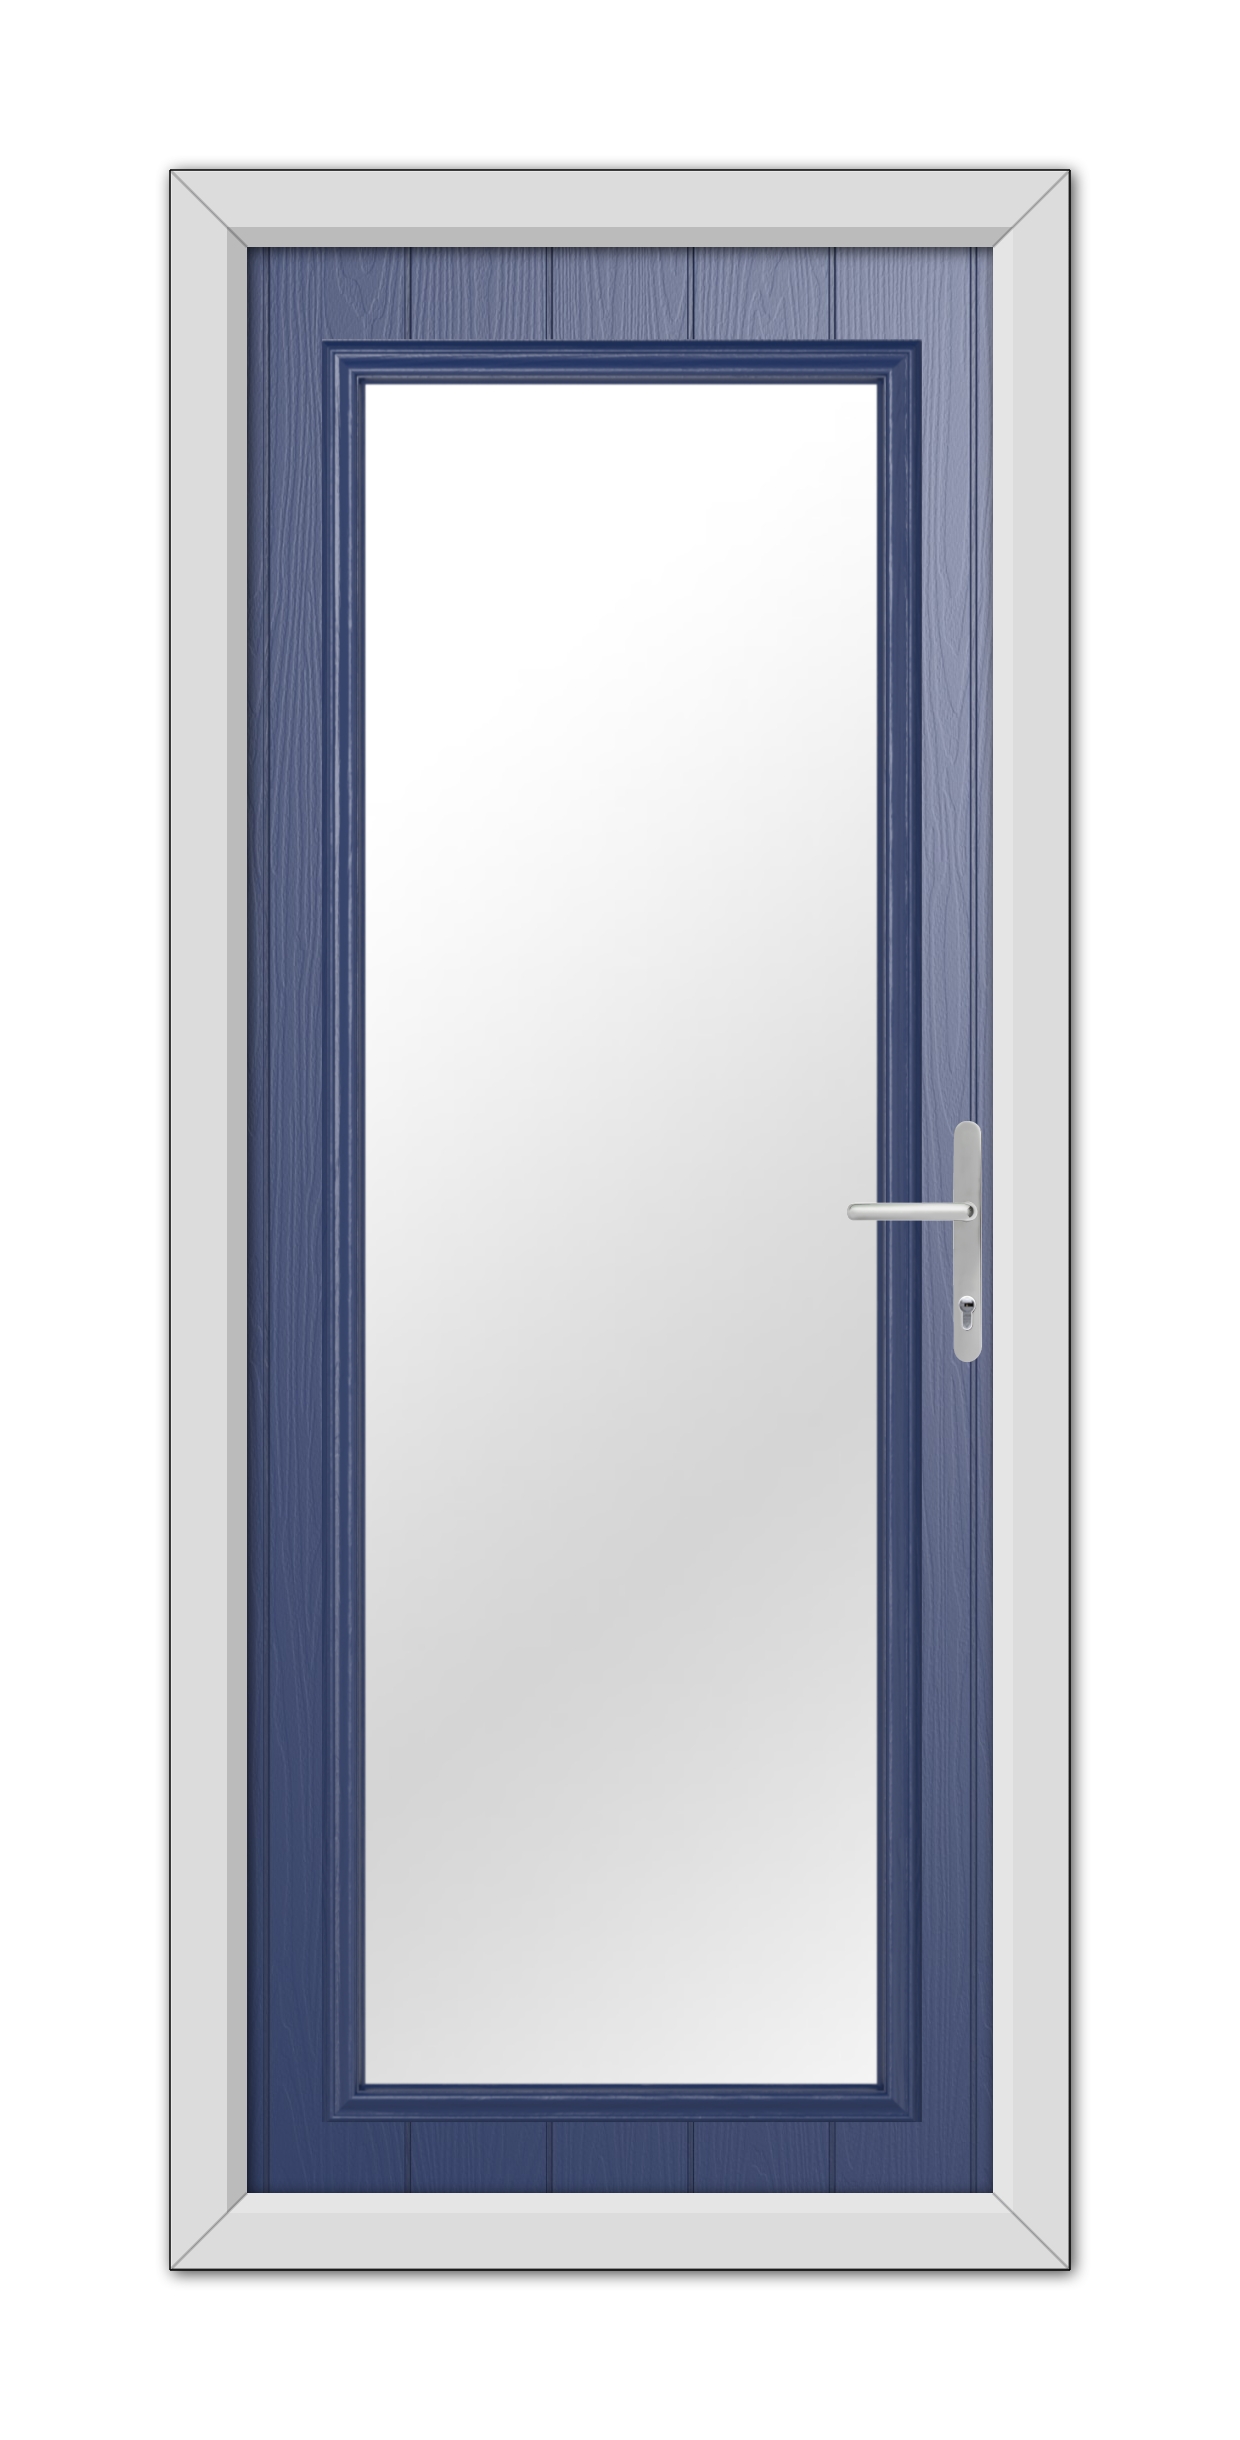 A modern closed Blue Hatton Composite Door 48mm Timber Core with a blue wooden finish and a white frame, featuring a simple silver handle on the right side.